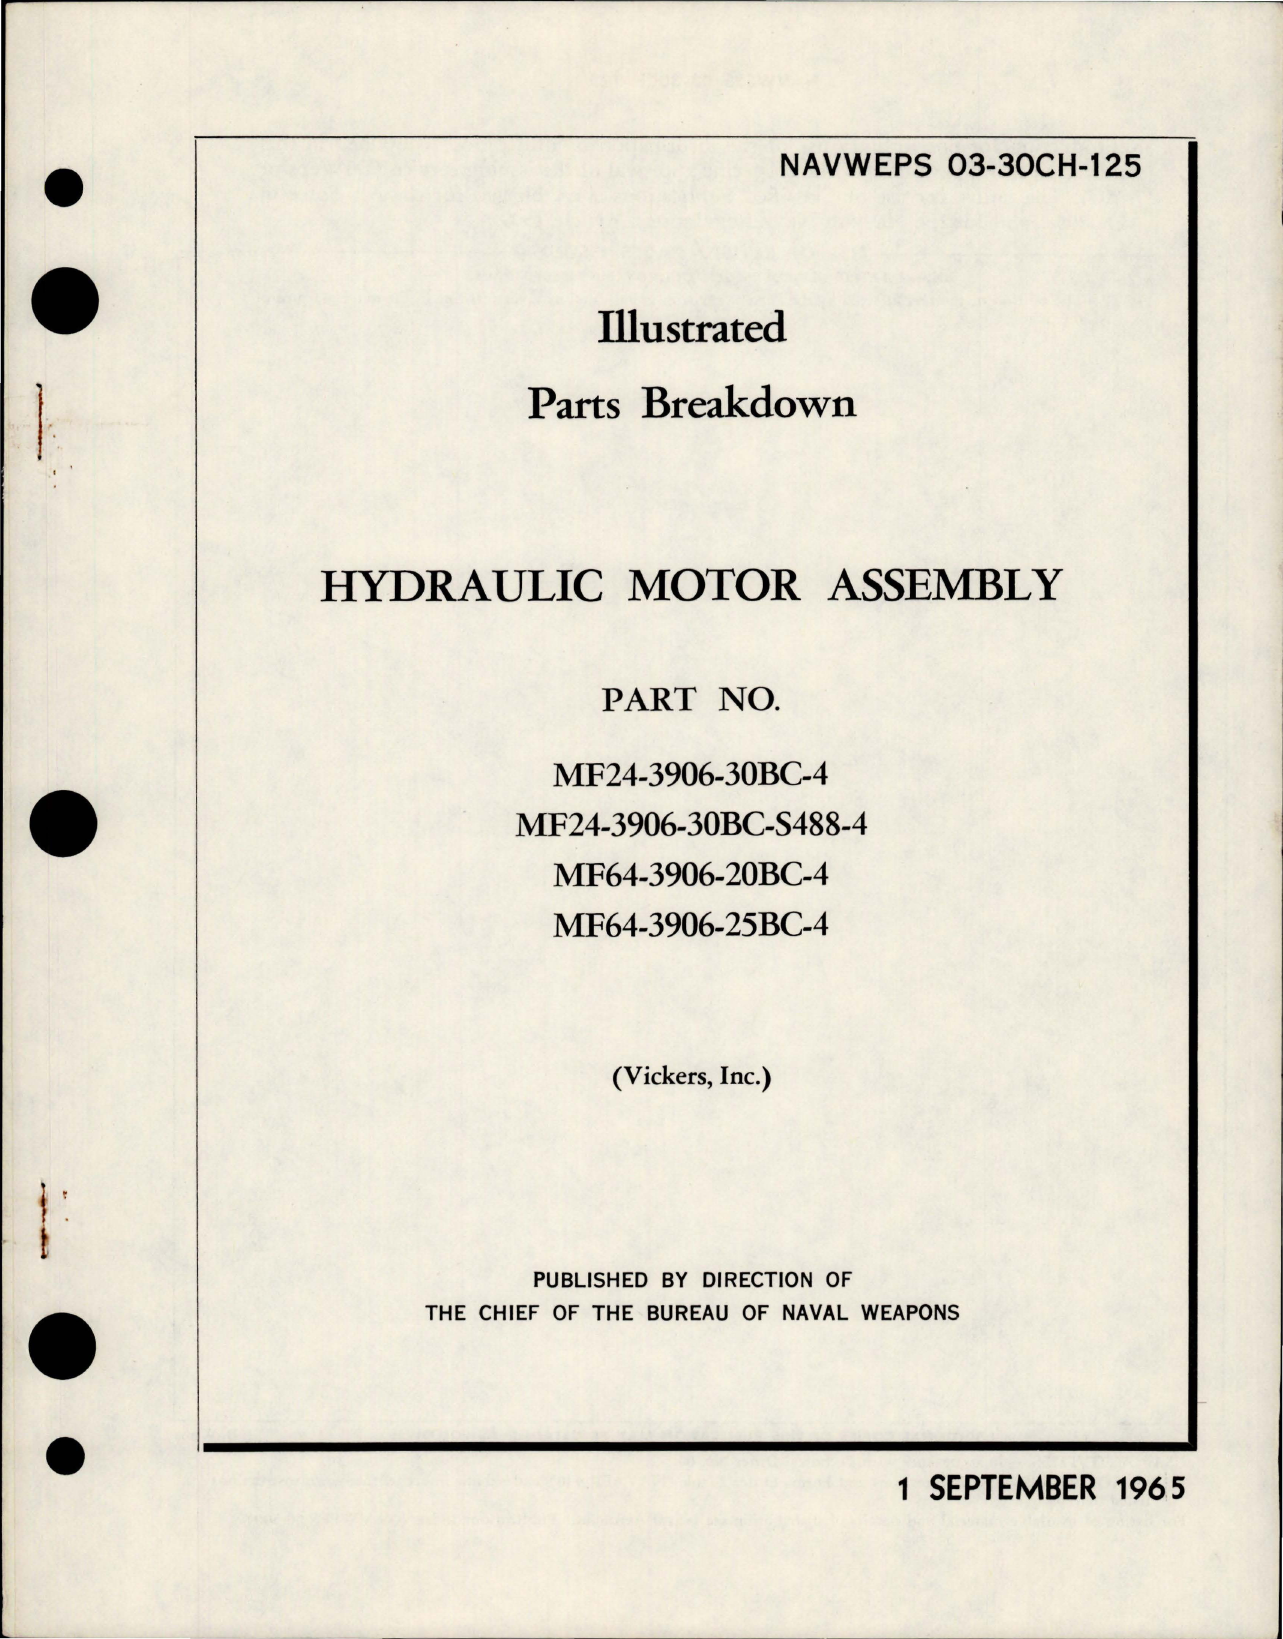 Sample page 1 from AirCorps Library document: Illustrated Parts Breakdown for Hydraulic Motor Assembly 